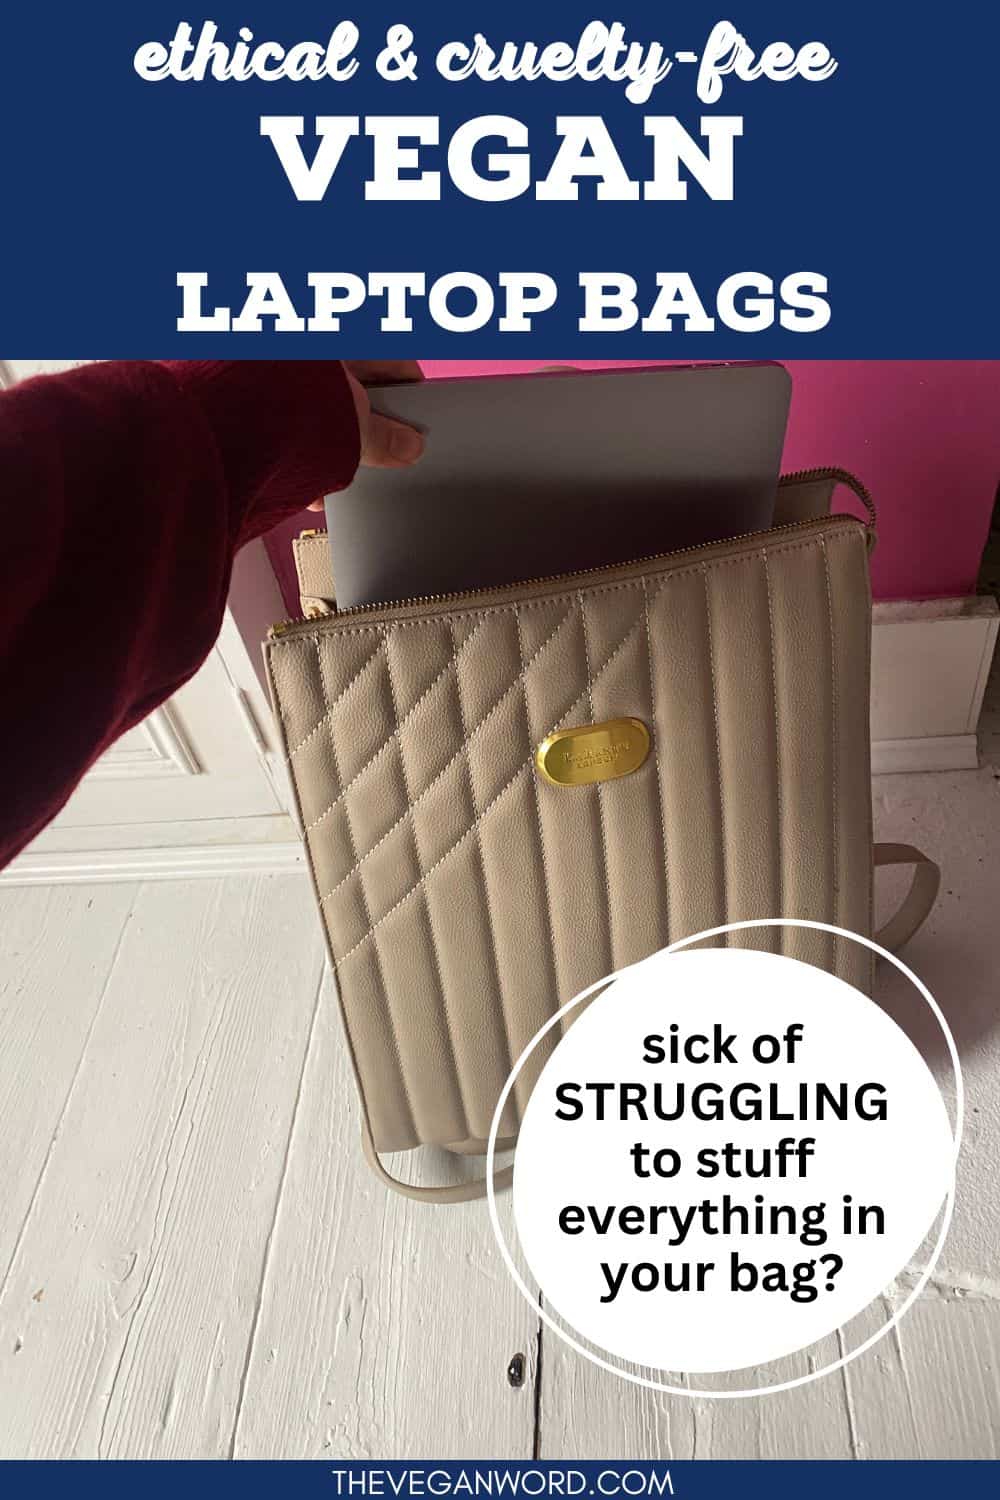 Pinterest bag showing a laptop bag with a laptop in it, with text that reads "ethical & cruelty-free vegan laptop bags. sick of struggling to stuff everything in your bag?"